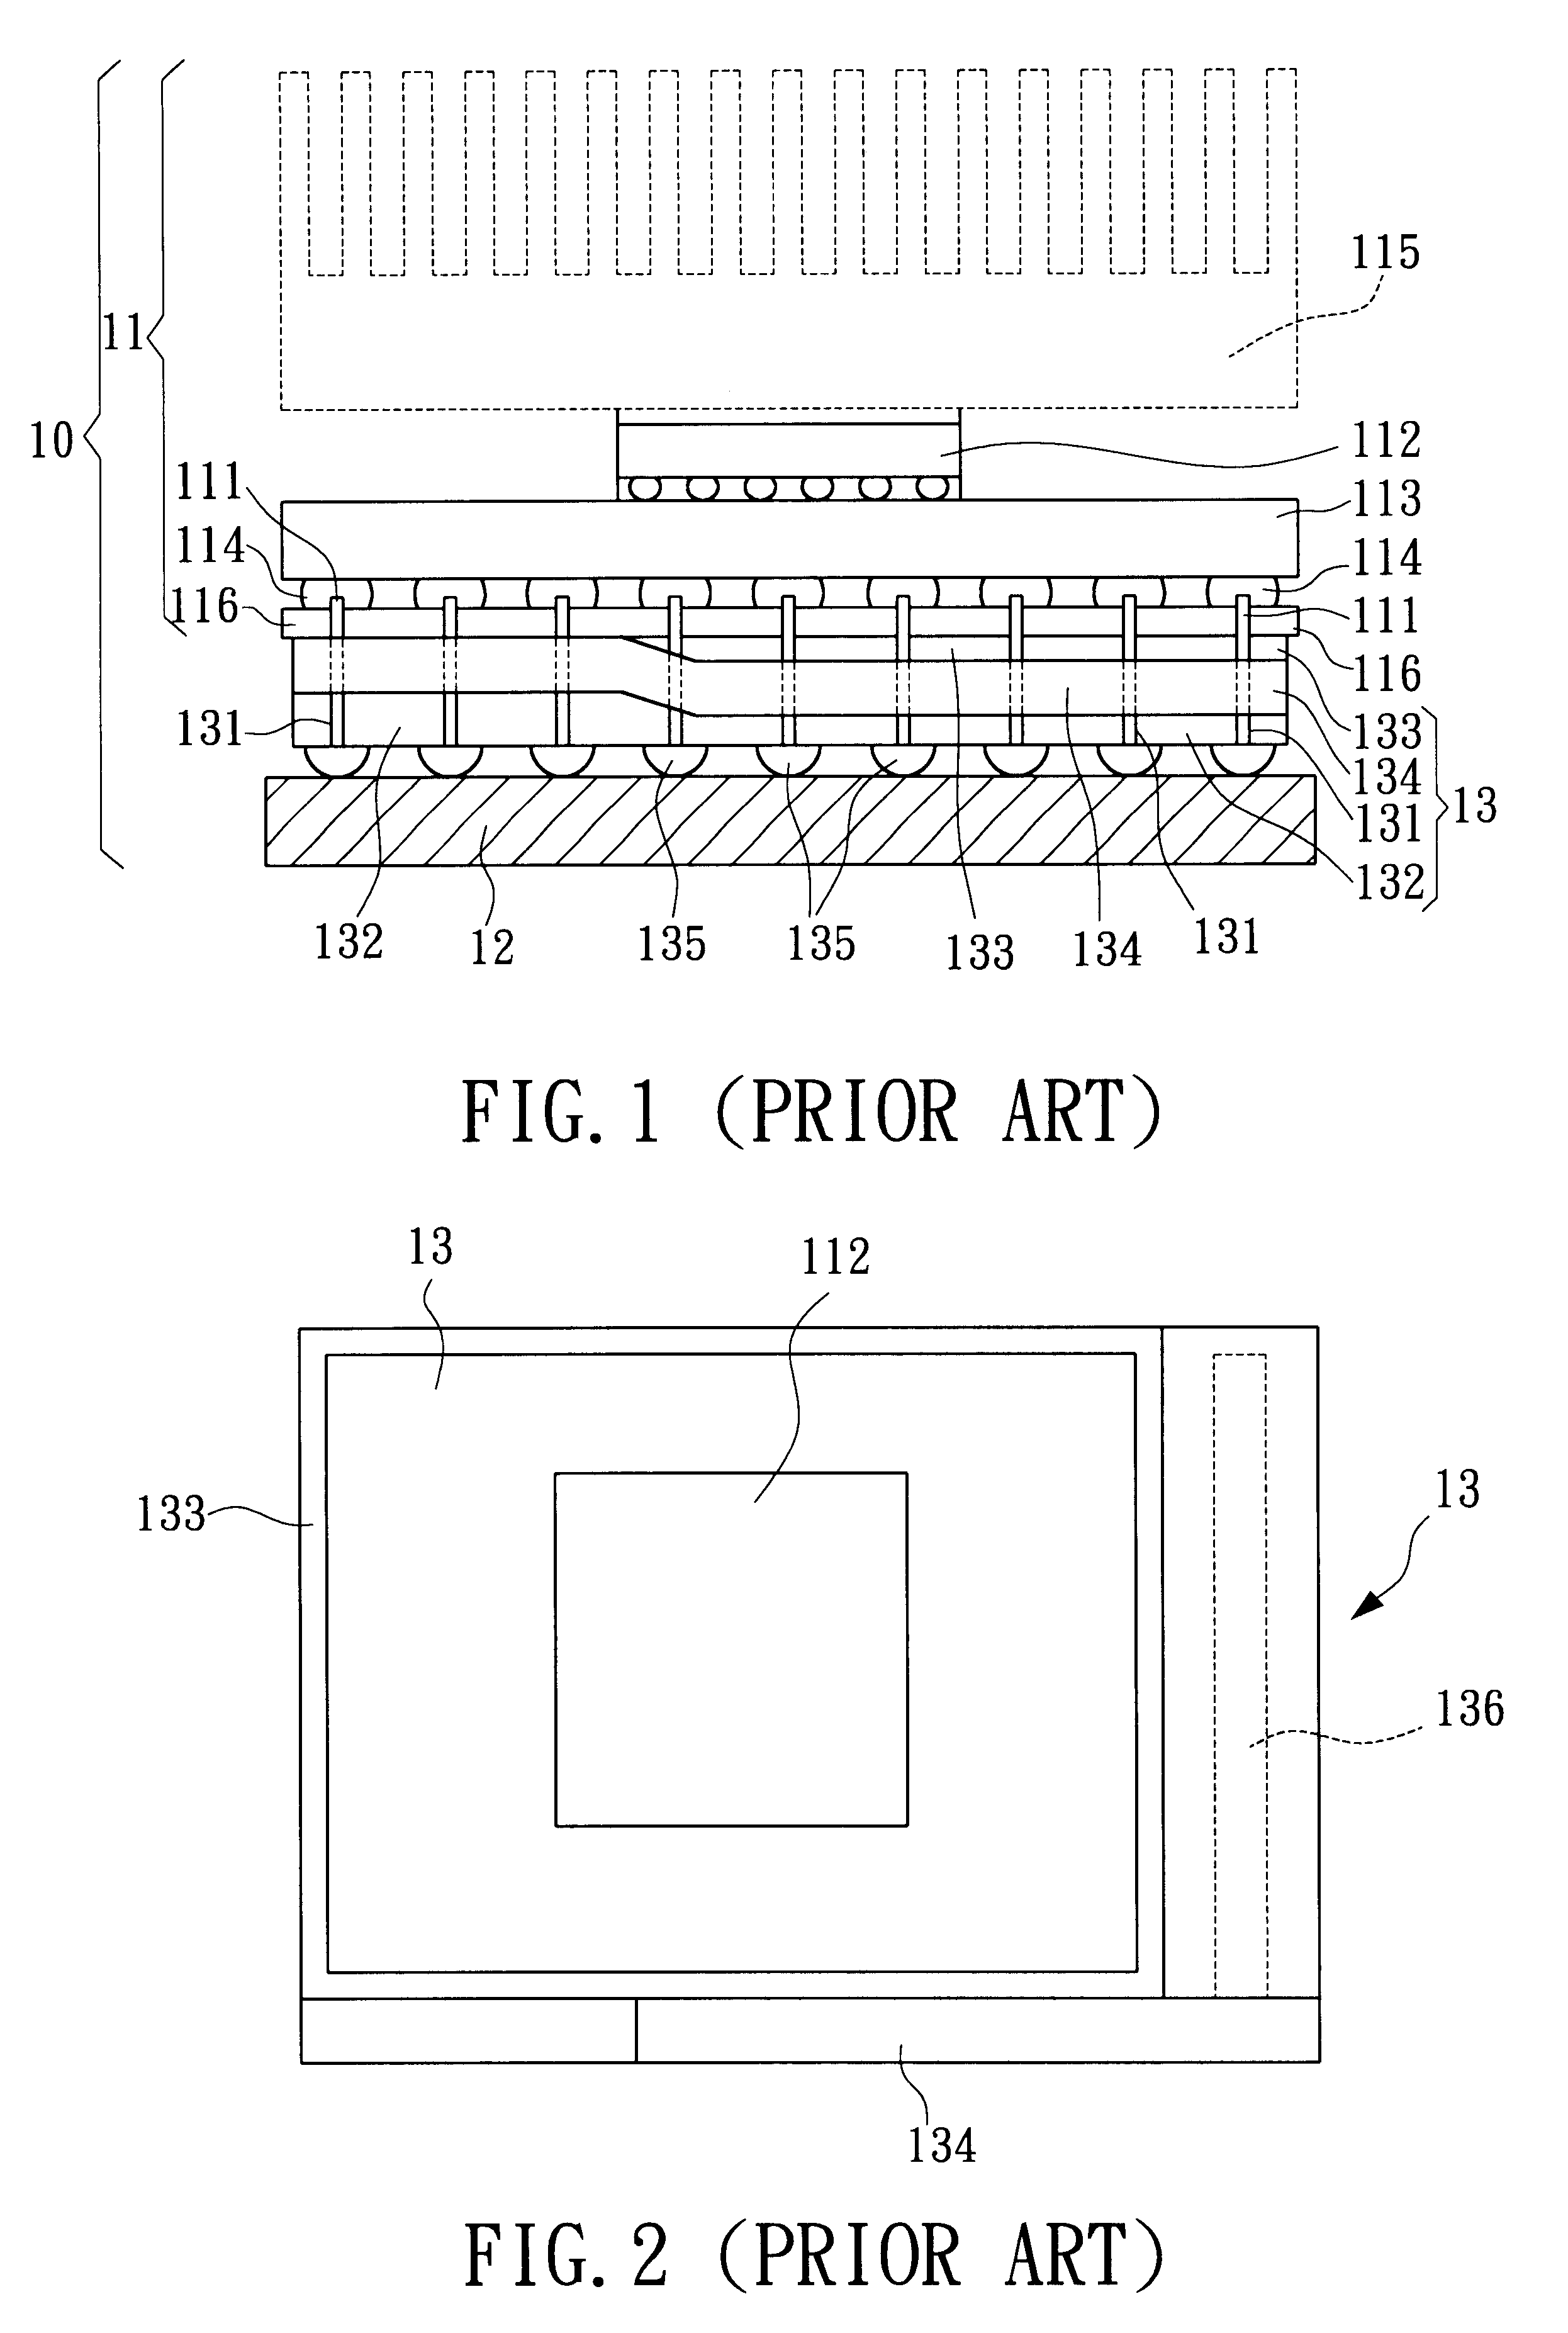 Pin grid array integrated circuit connecting device